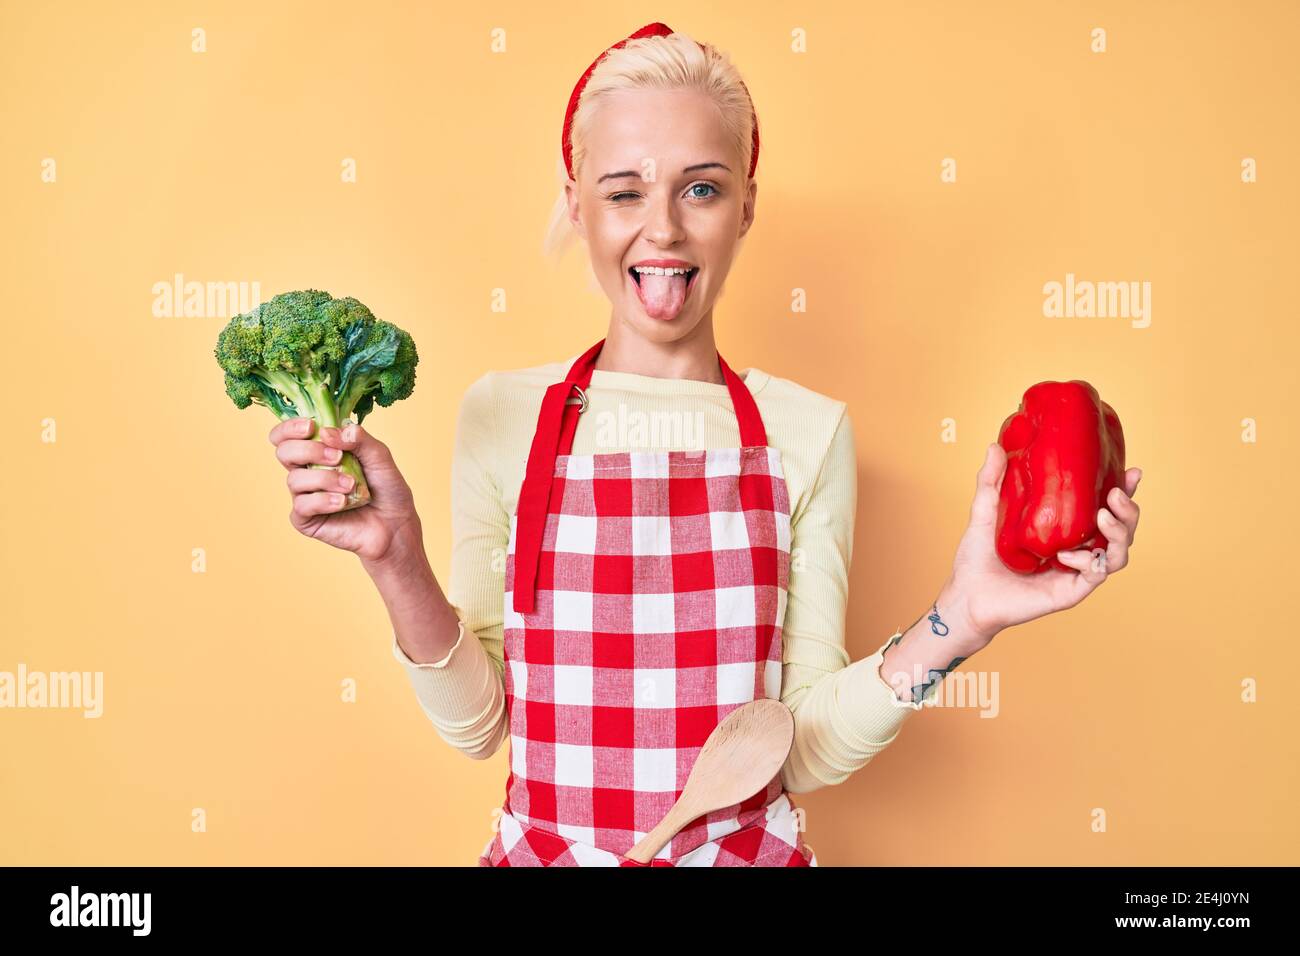 Young blonde woman with tattoo wearing cook apron holding broccoli and red pepper sticking tongue out happy with funny expression. Stock Photo